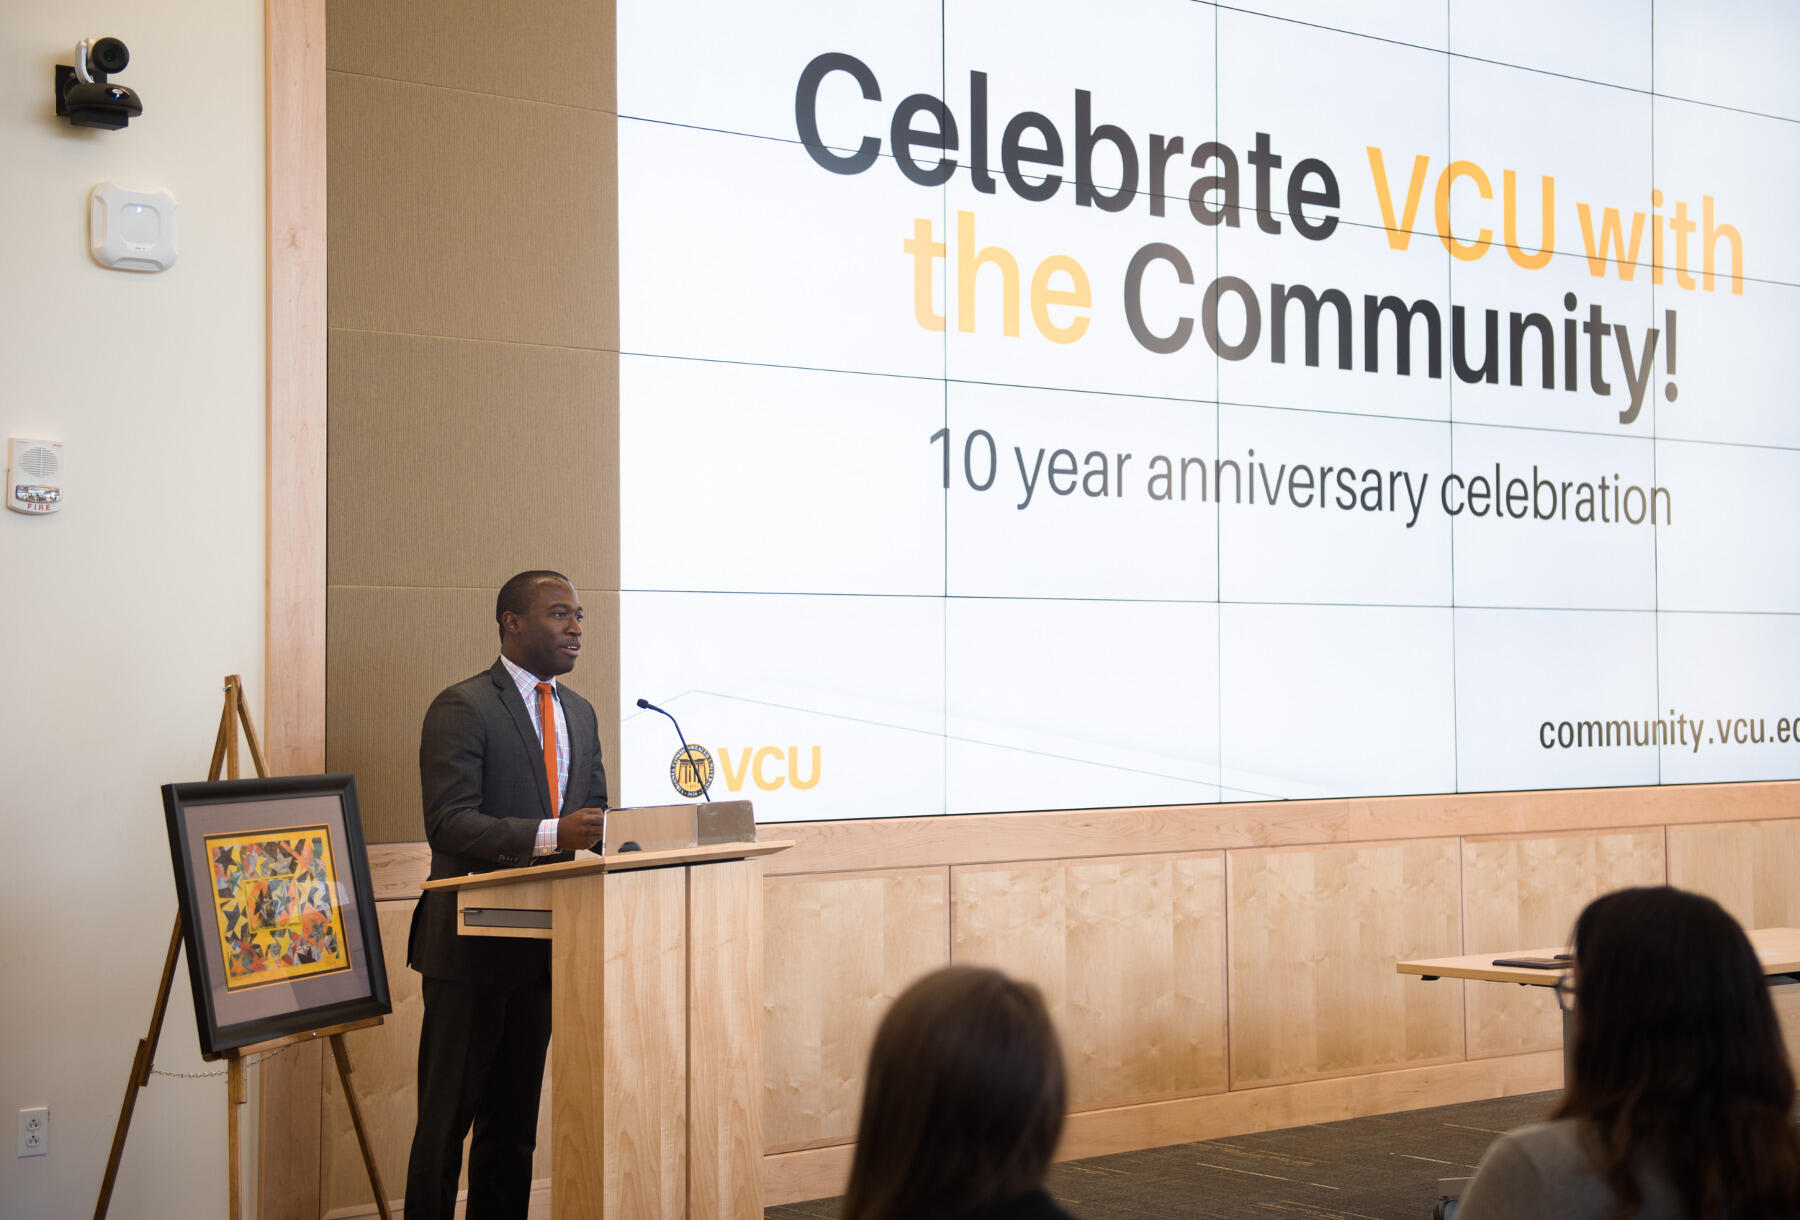 Richmond Mayor Levar Stoney said he "can think of no better partner than VCU."